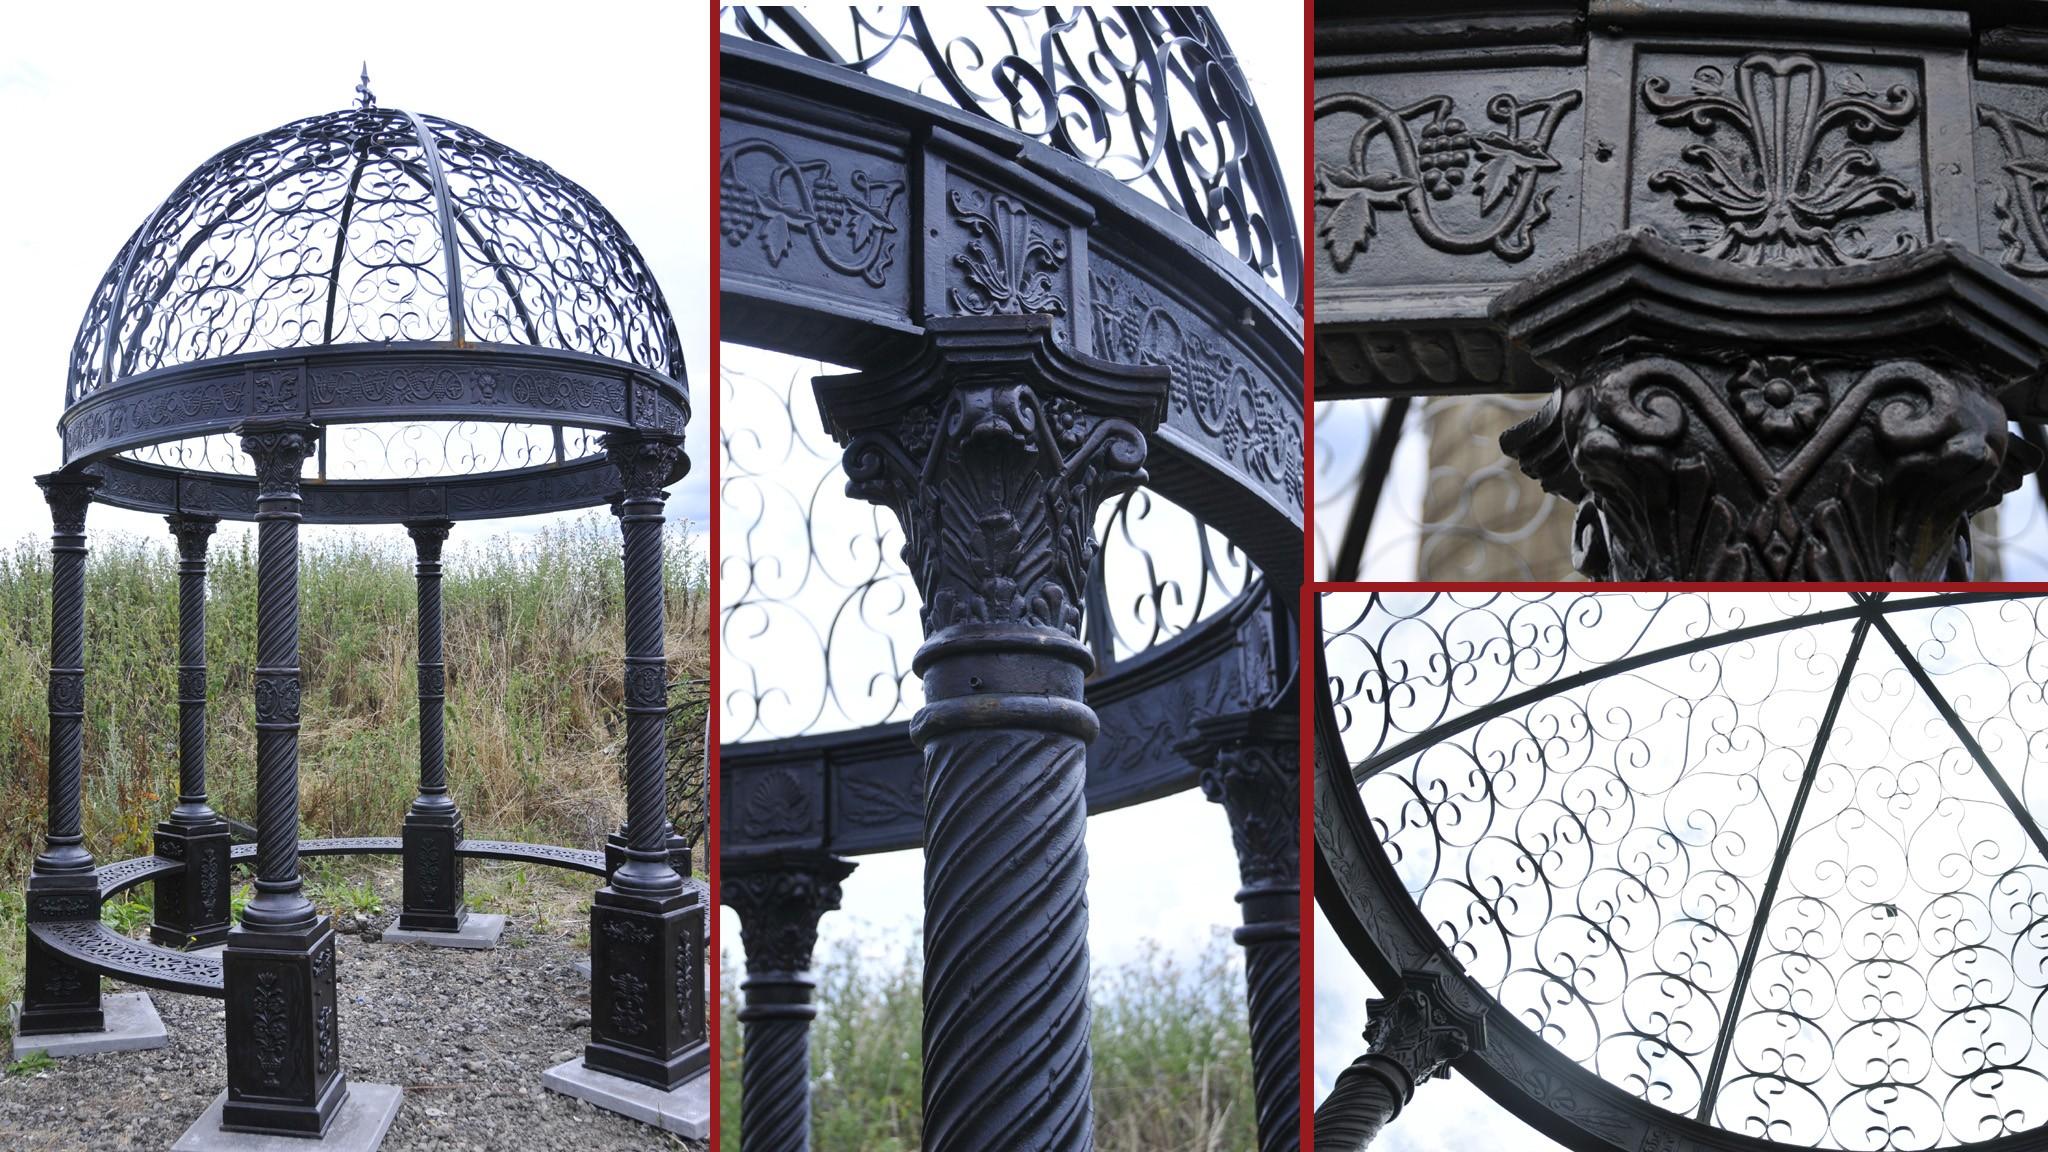 Massive cast iron Victorian style gazebo of an architectural importance
Stands in at nearly fifteen feet tall so very big
Once set up over months and years foliage and vines will grow over the canopy to give extra shade and to look incredibly